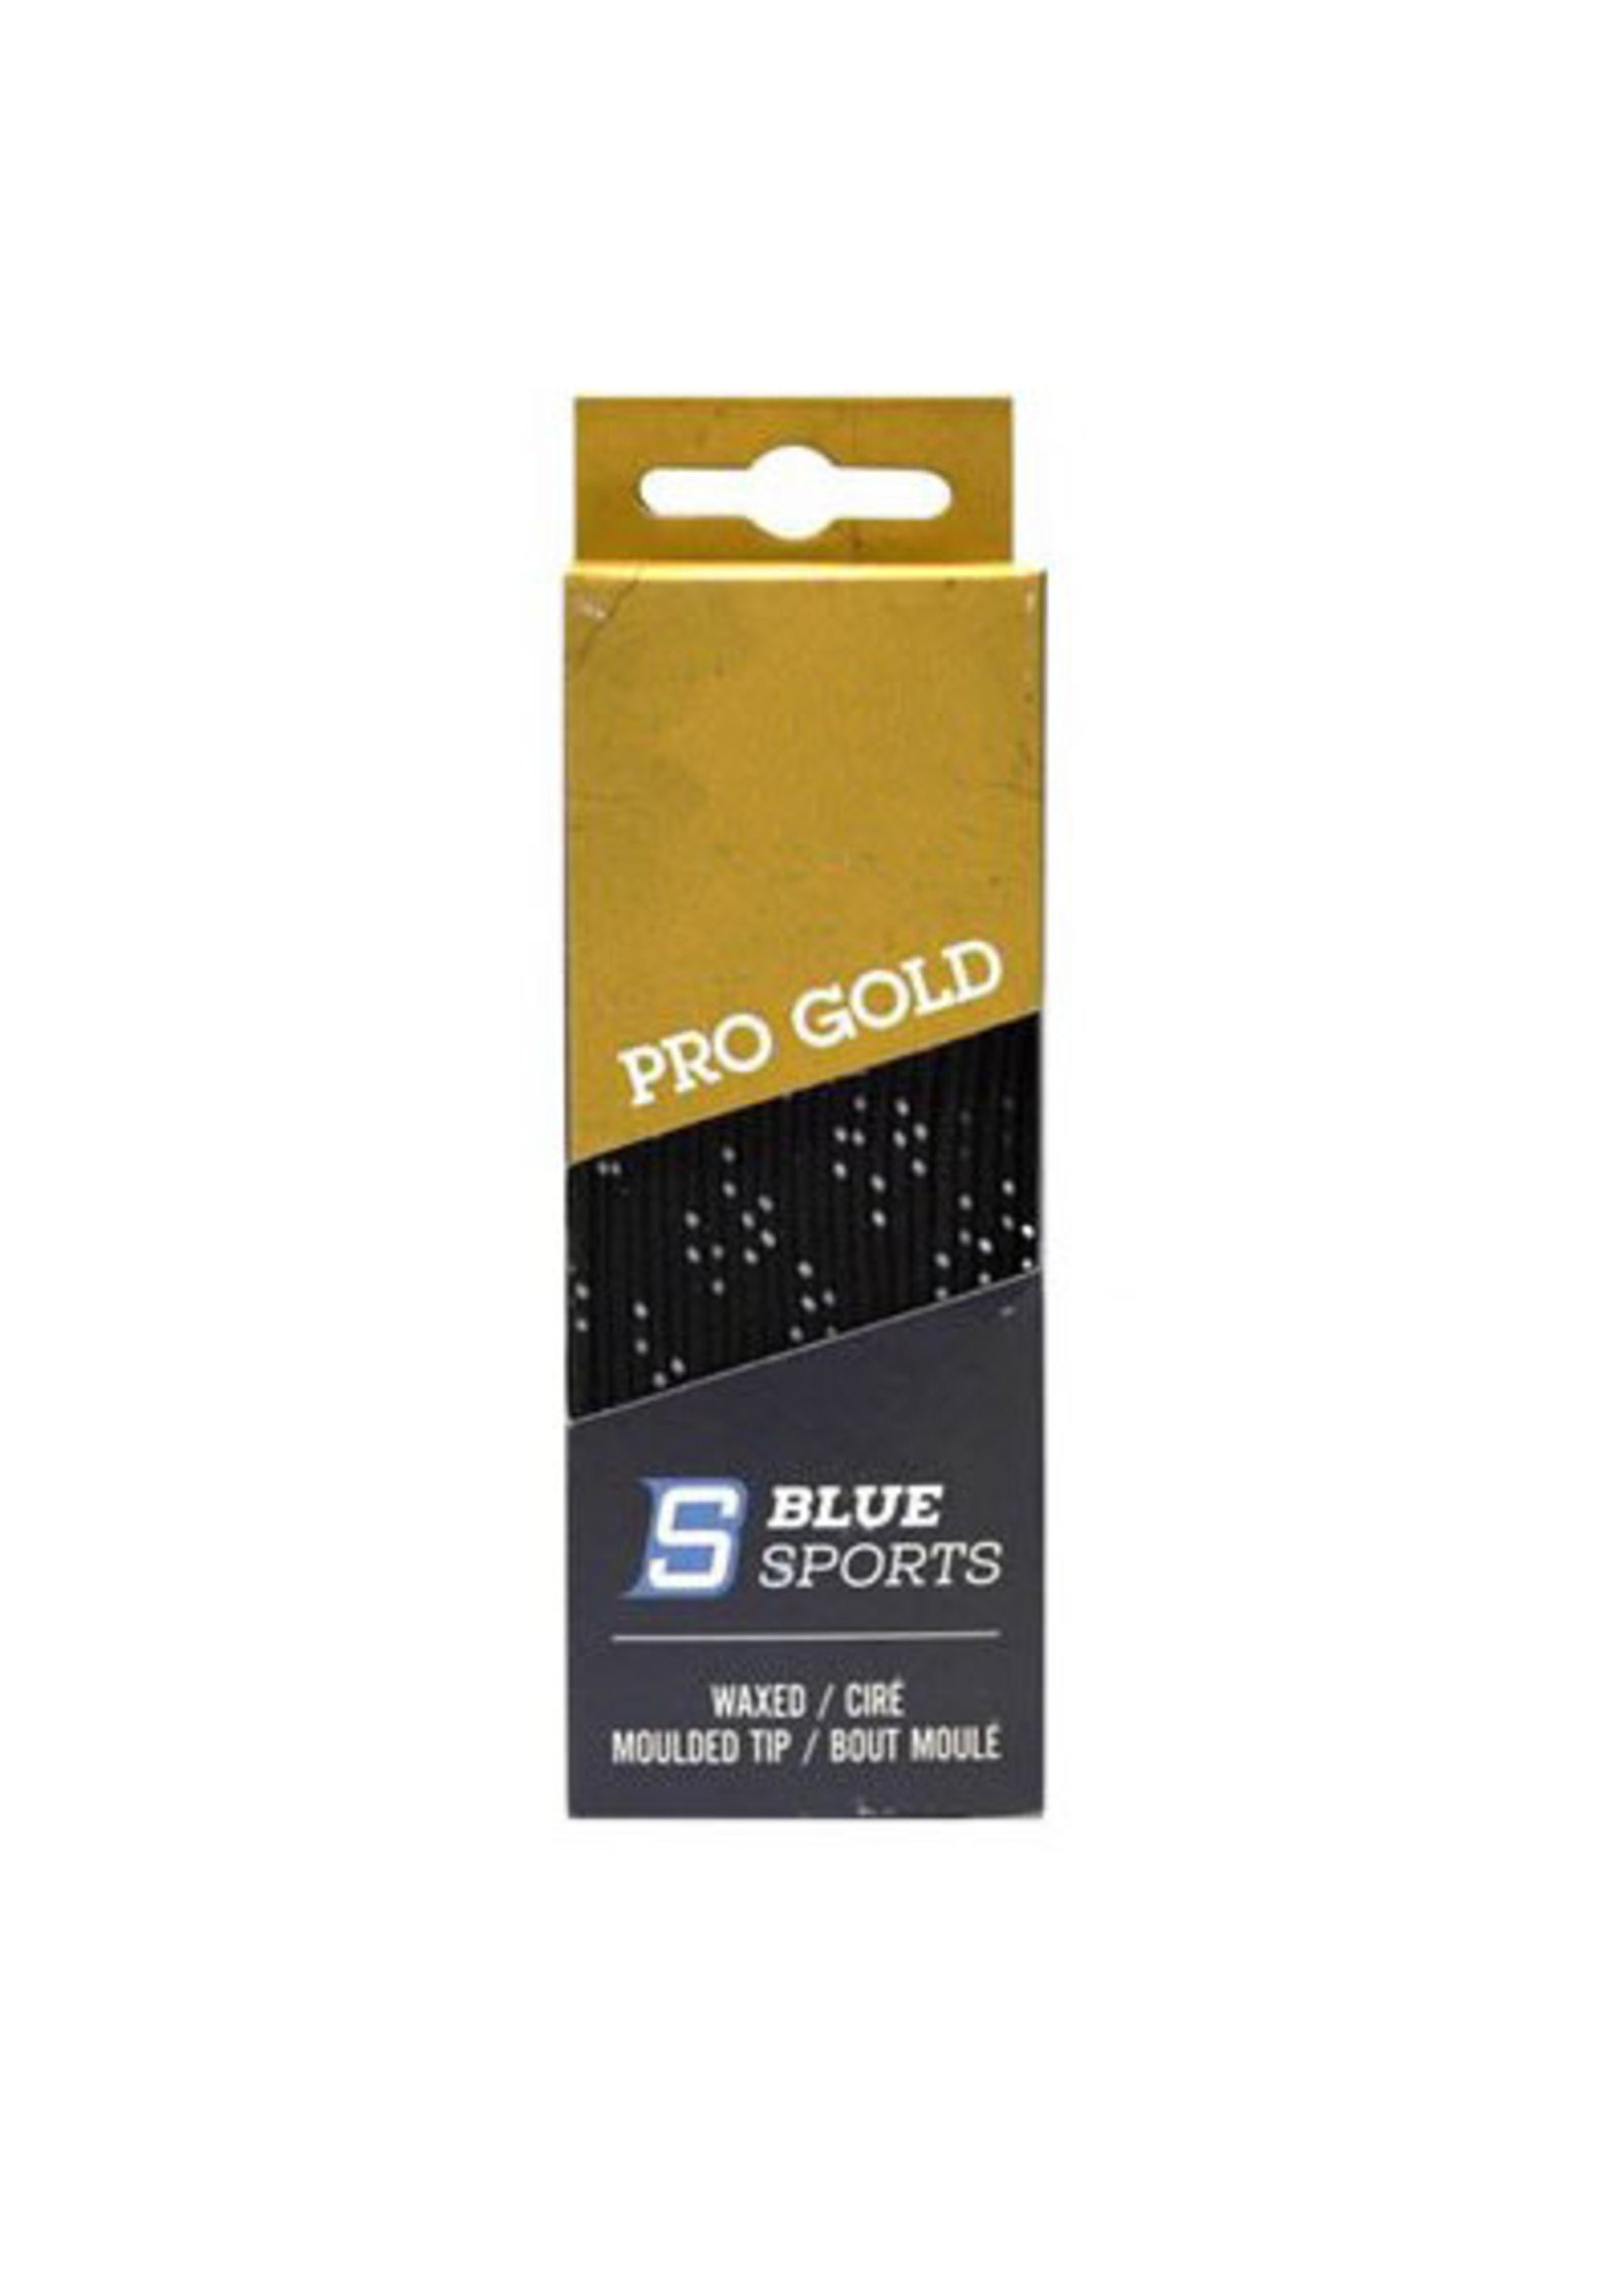 Blue Sports BLUE SPORTS PRO GOLD WAXED LACES